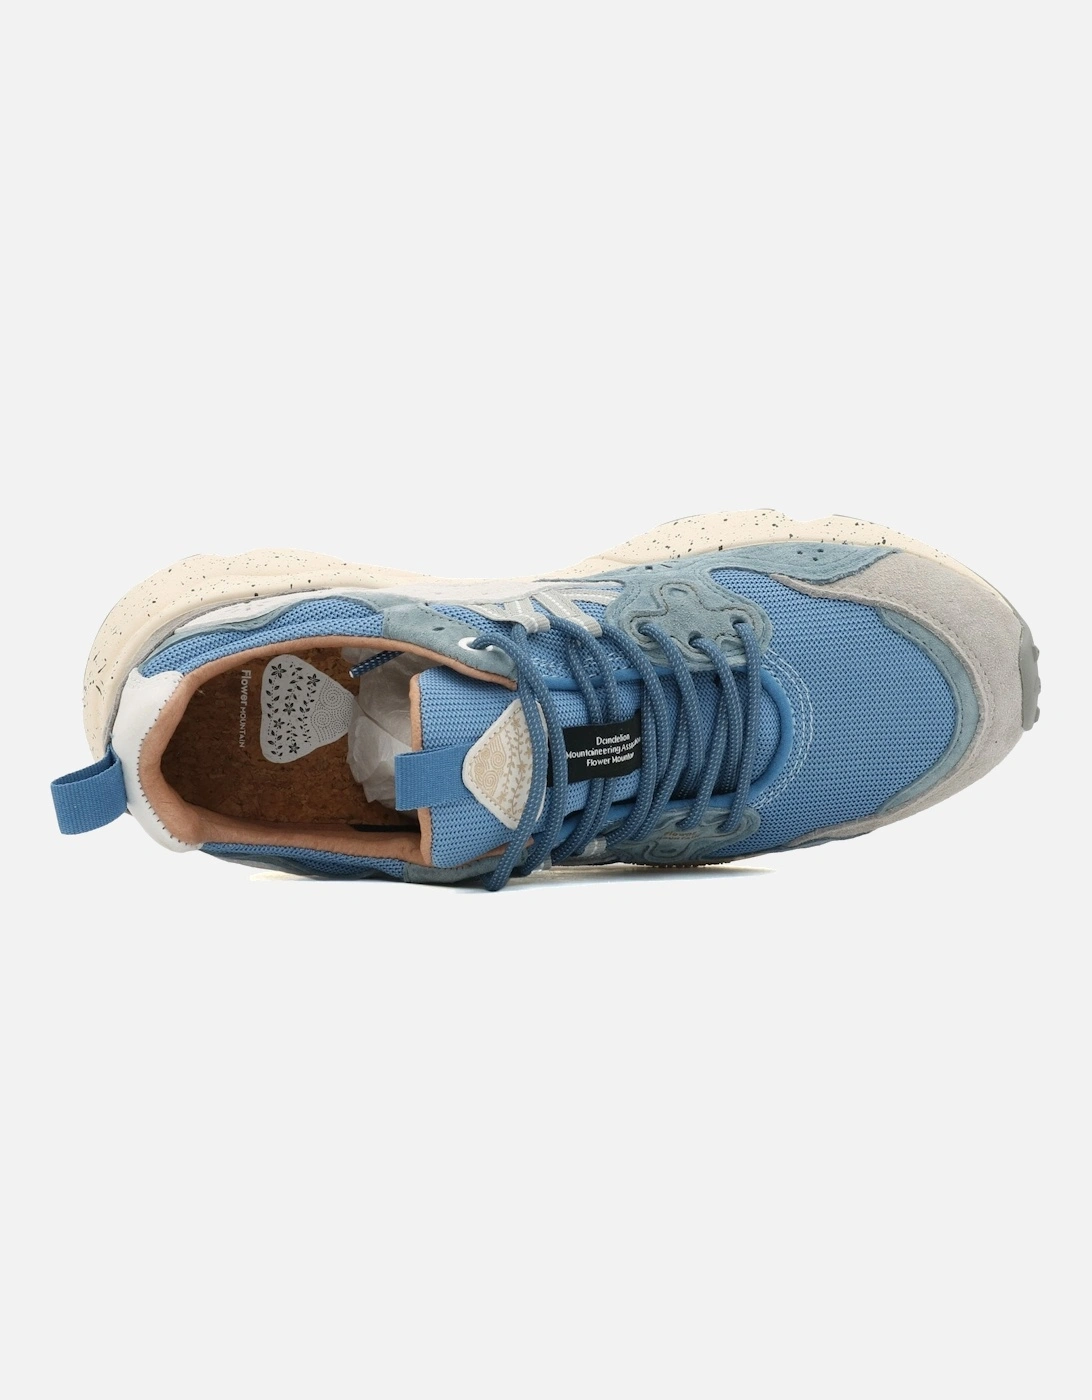 Yamano 3 Suede Mesh Blue Trainer